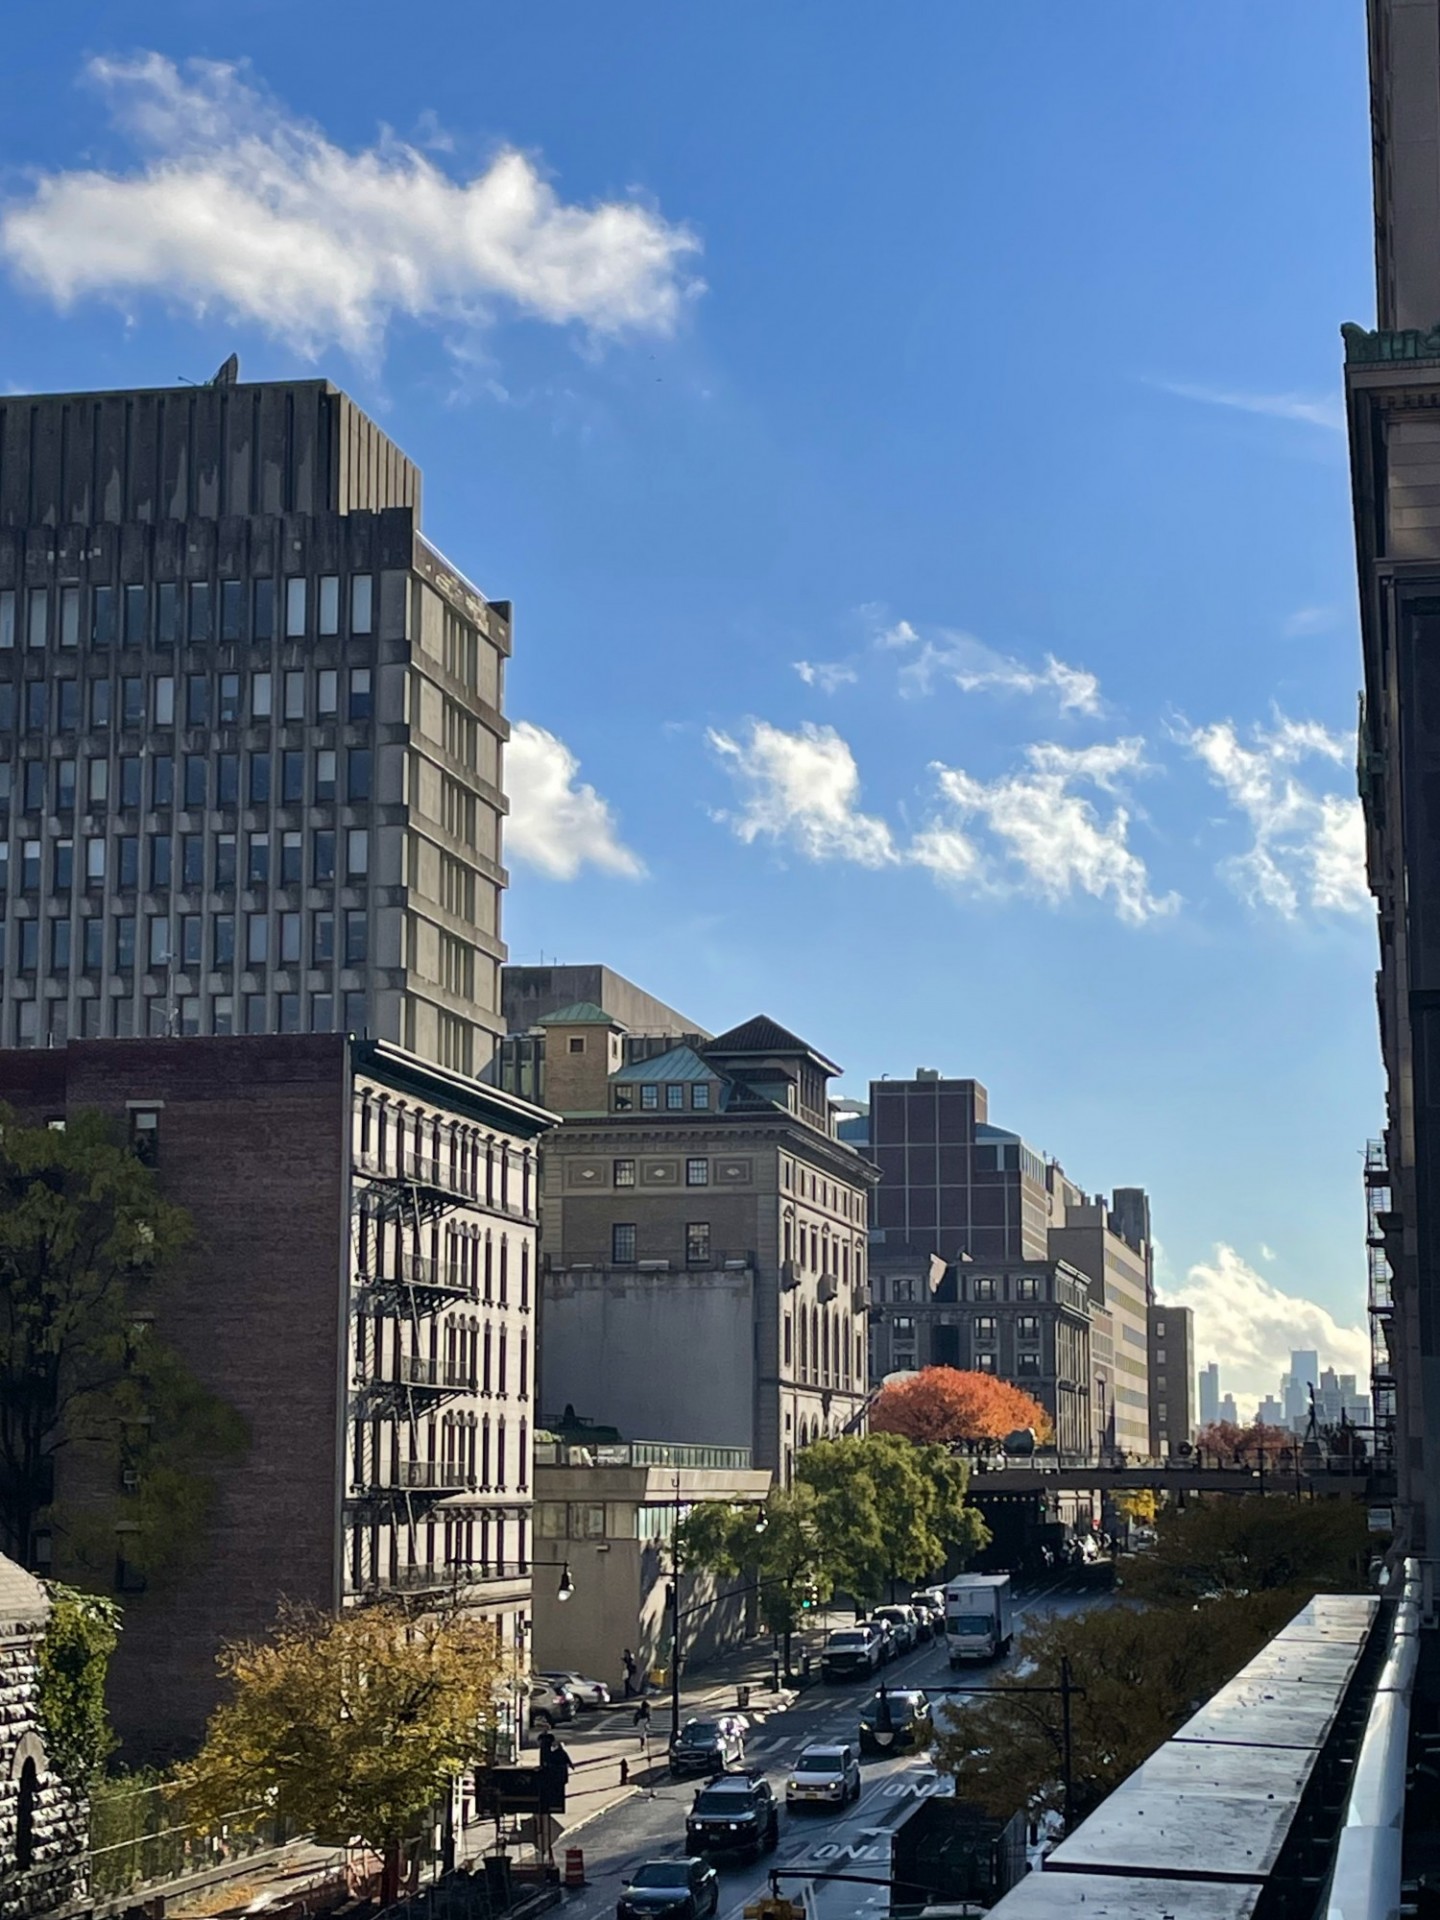 South-facing view of Amsterdam Avenue from the Morningside campus